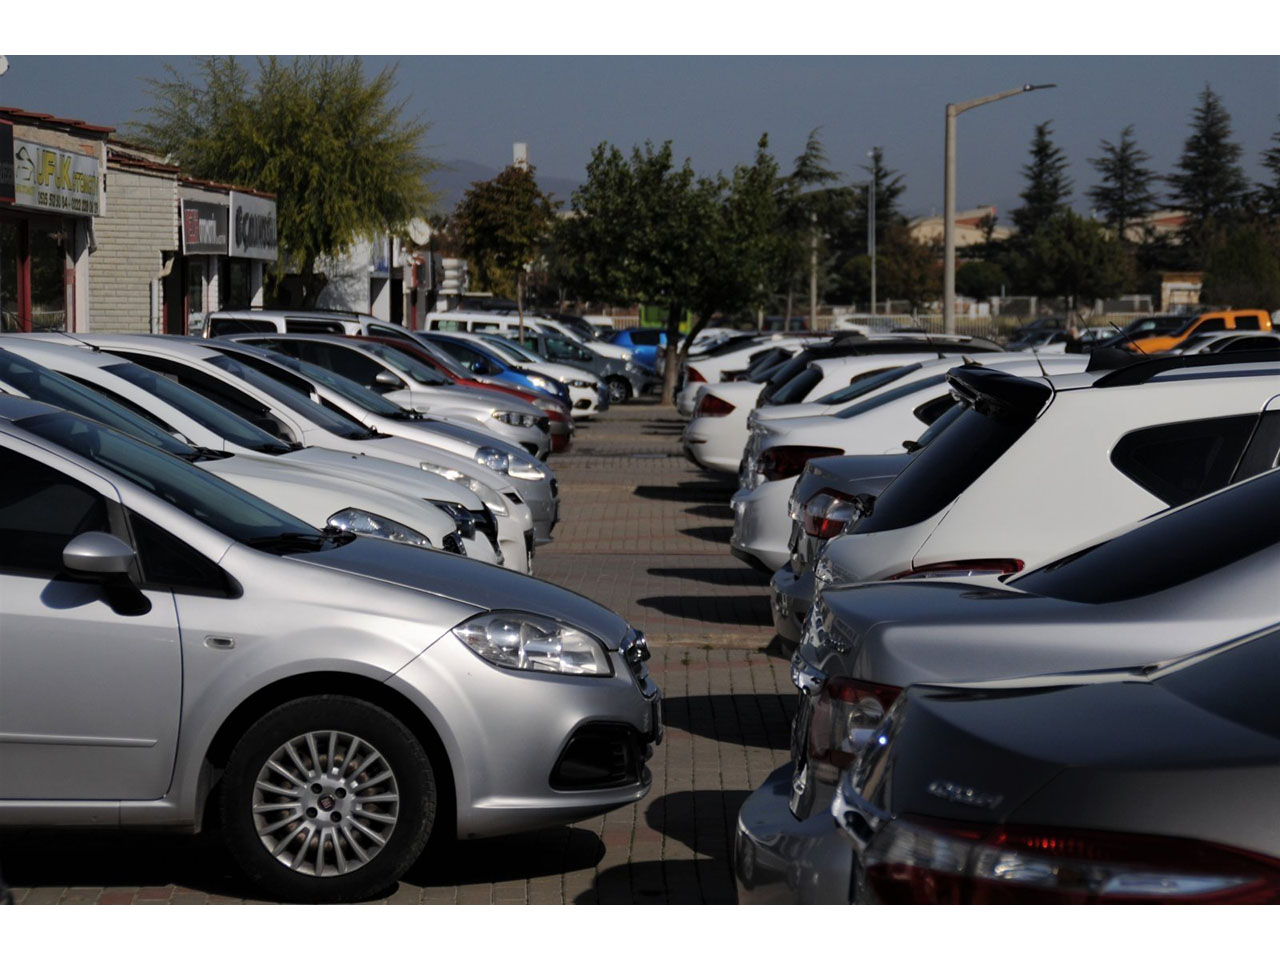 Photo 8 - PURCHASE OF CARS SALE - Second hand car shops, Kovin